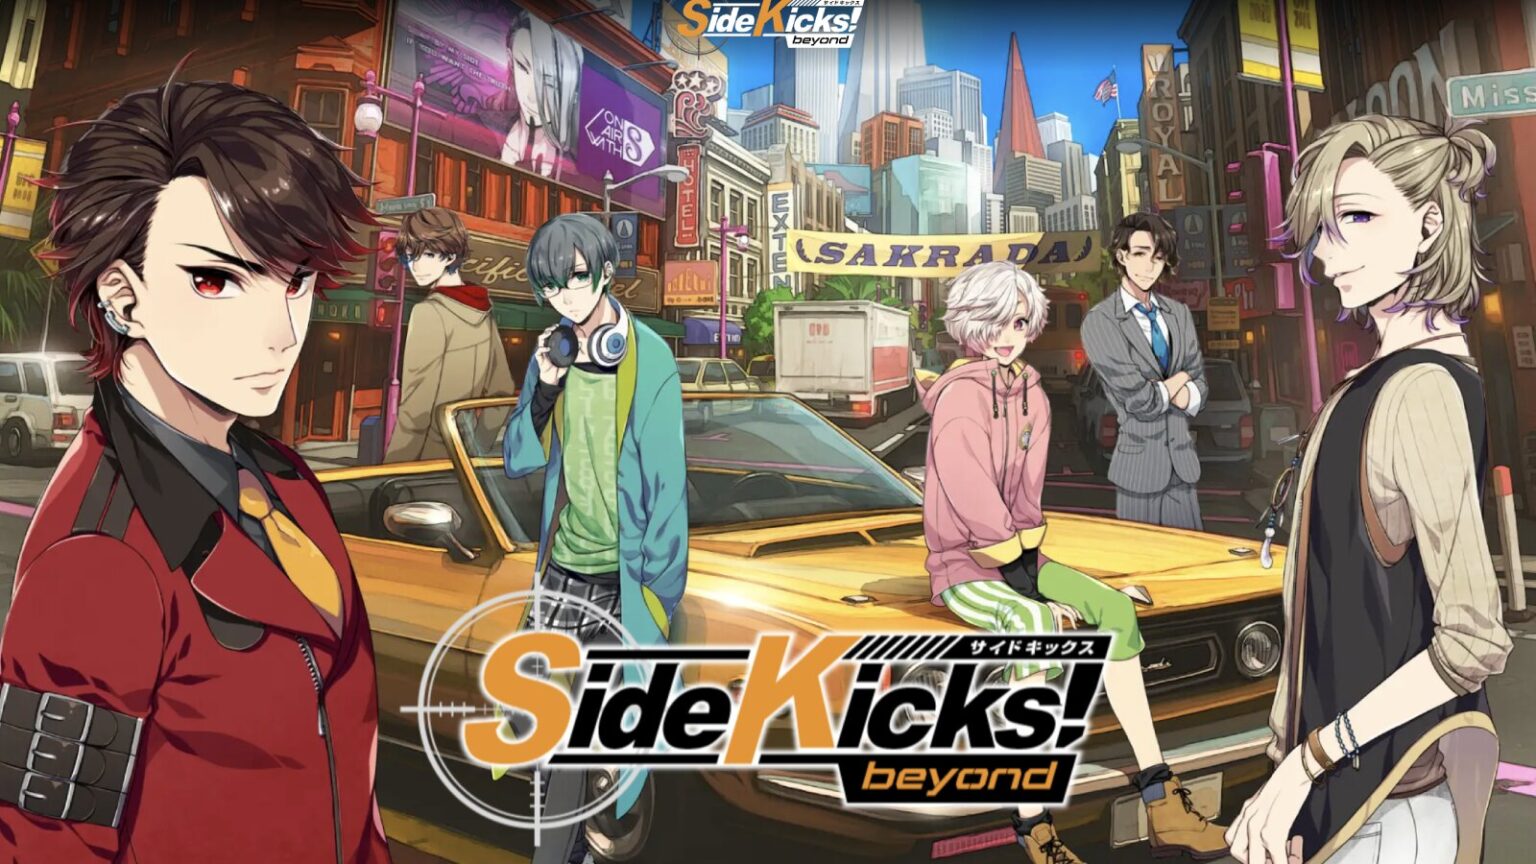 Colorful characters unite in Side Kicks Beyond Android game artwork